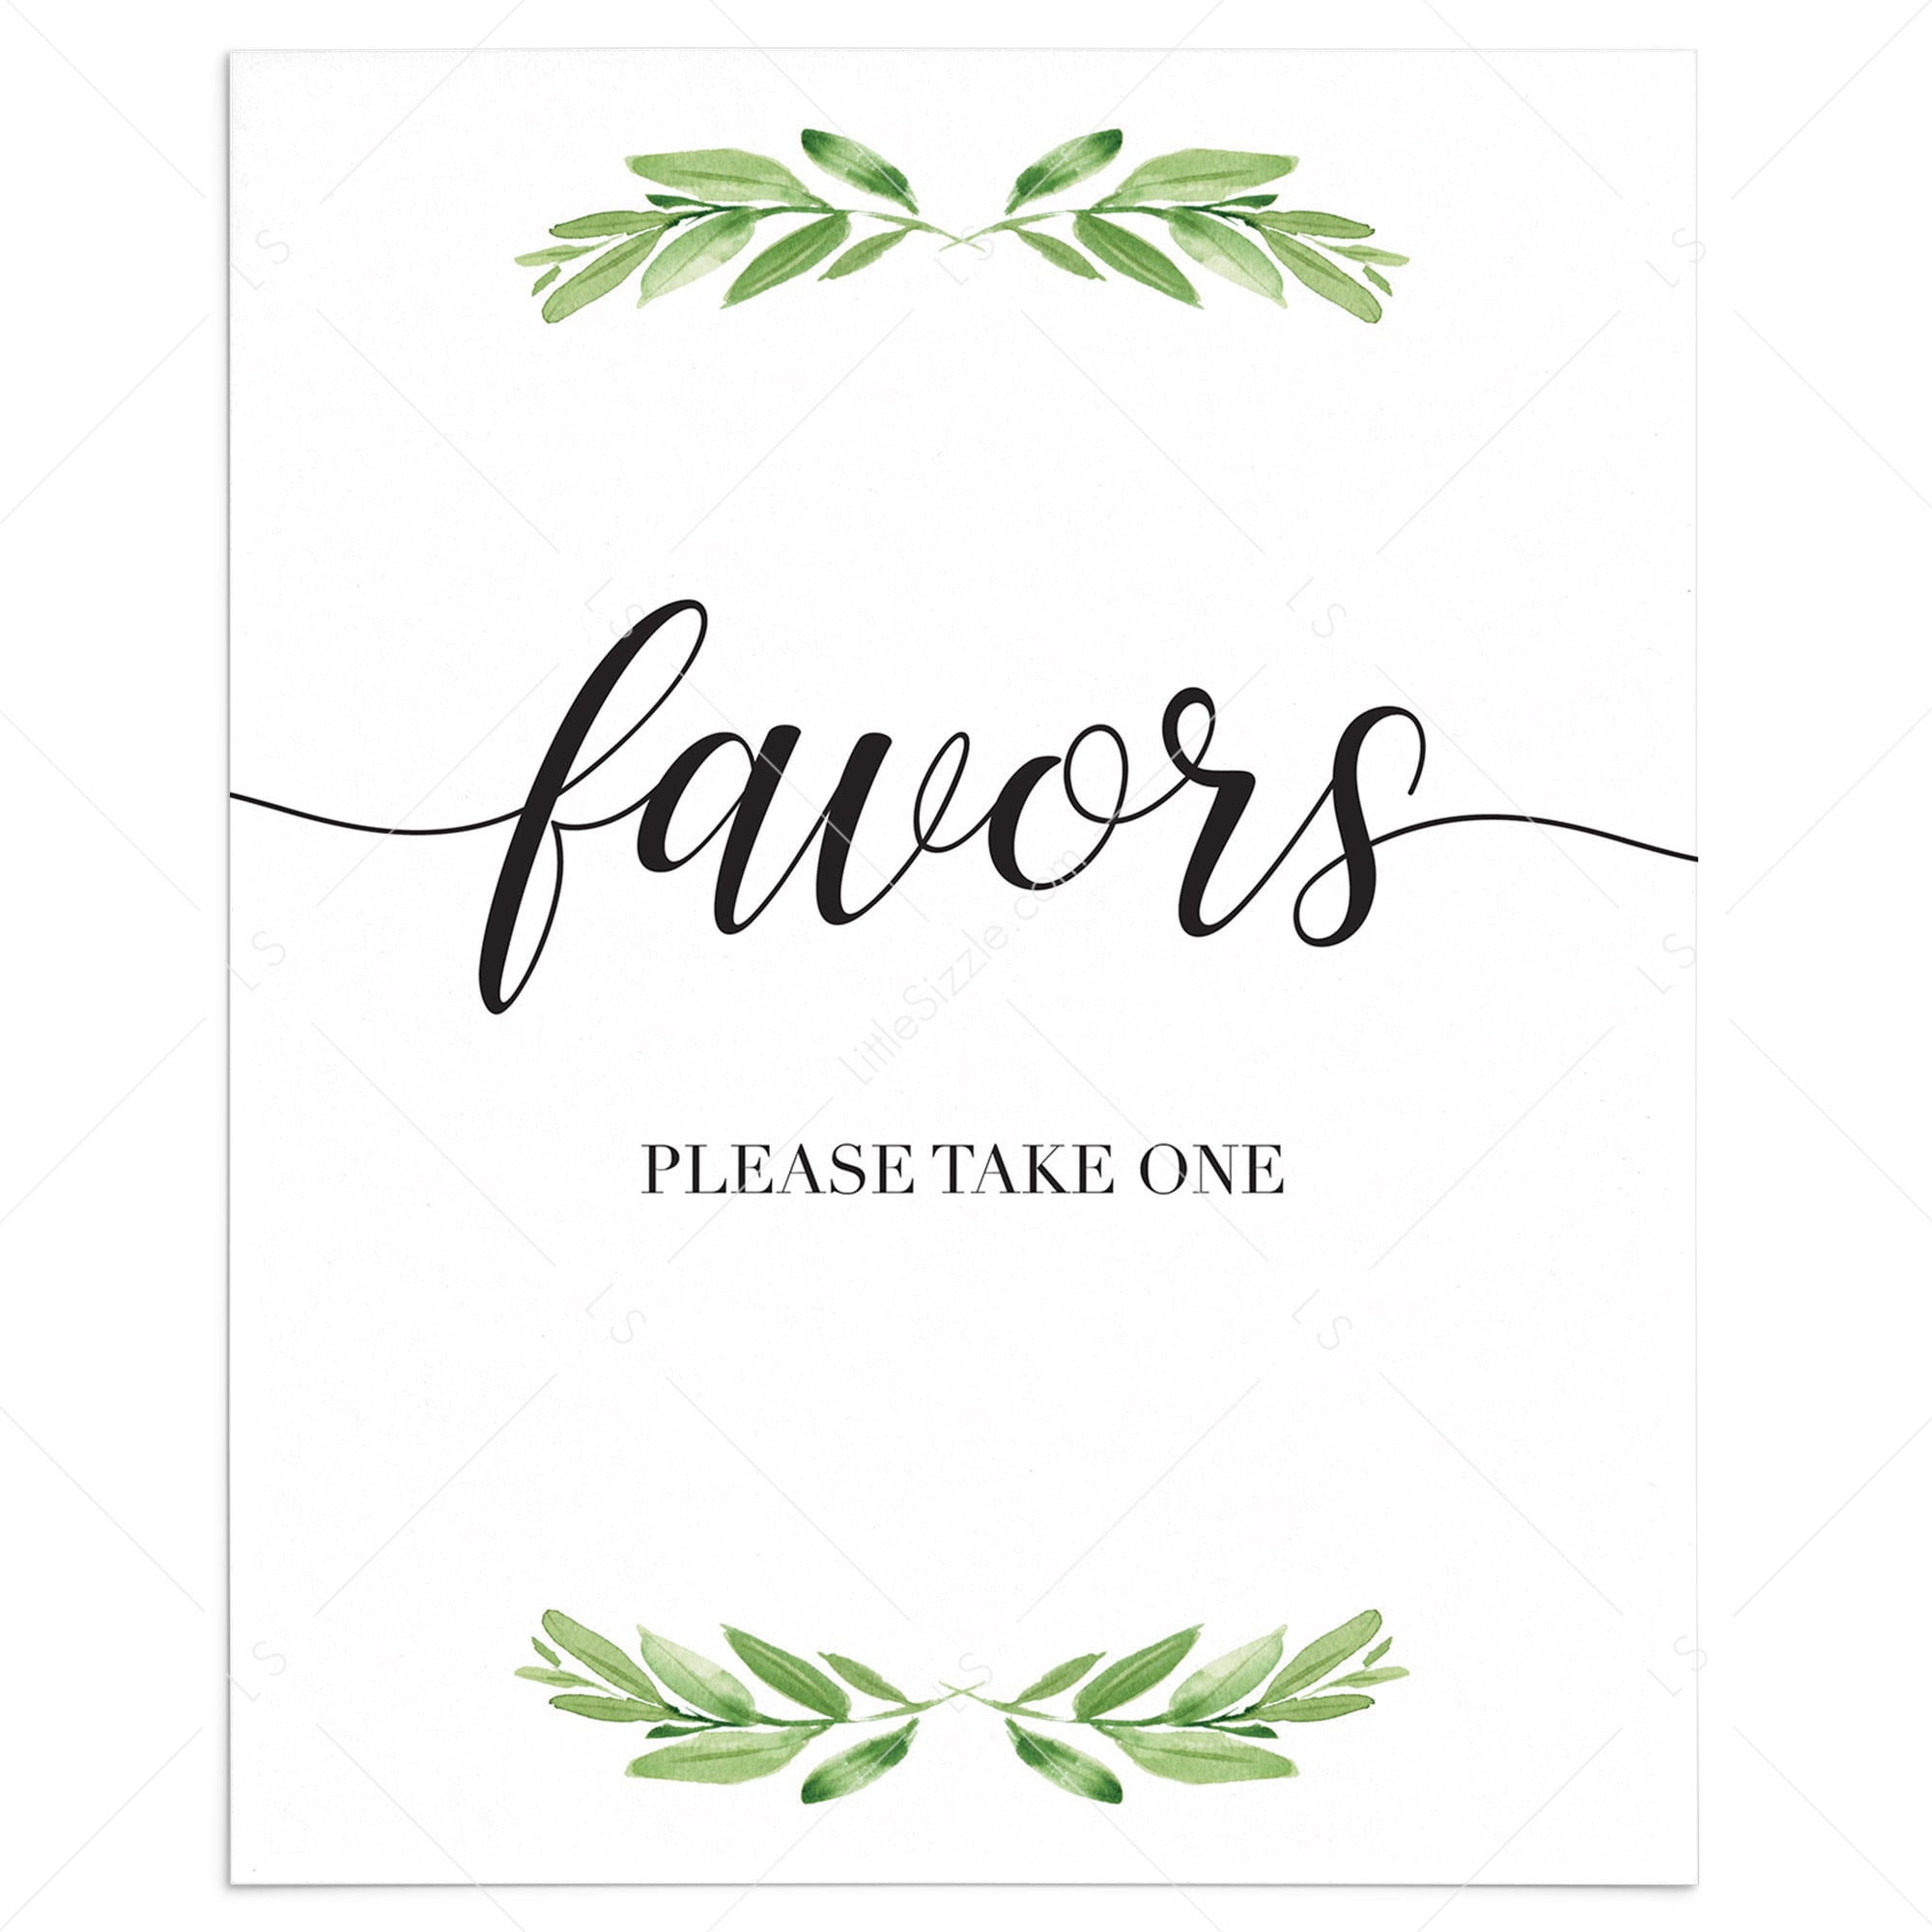 Printable favors sign for greenery themed baby shower by LittleSizzle